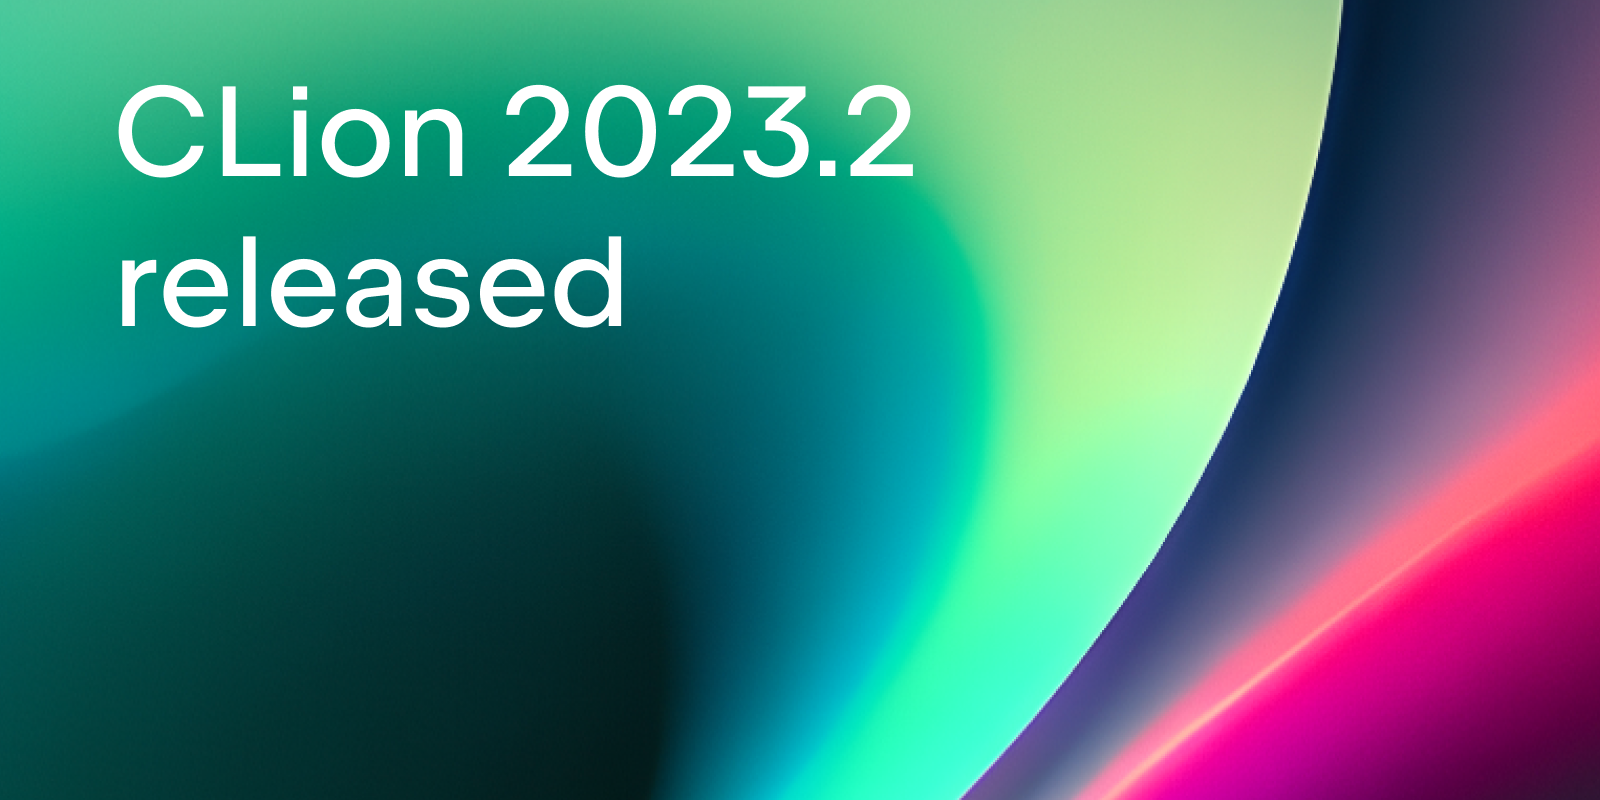 CLion 2023.2 released